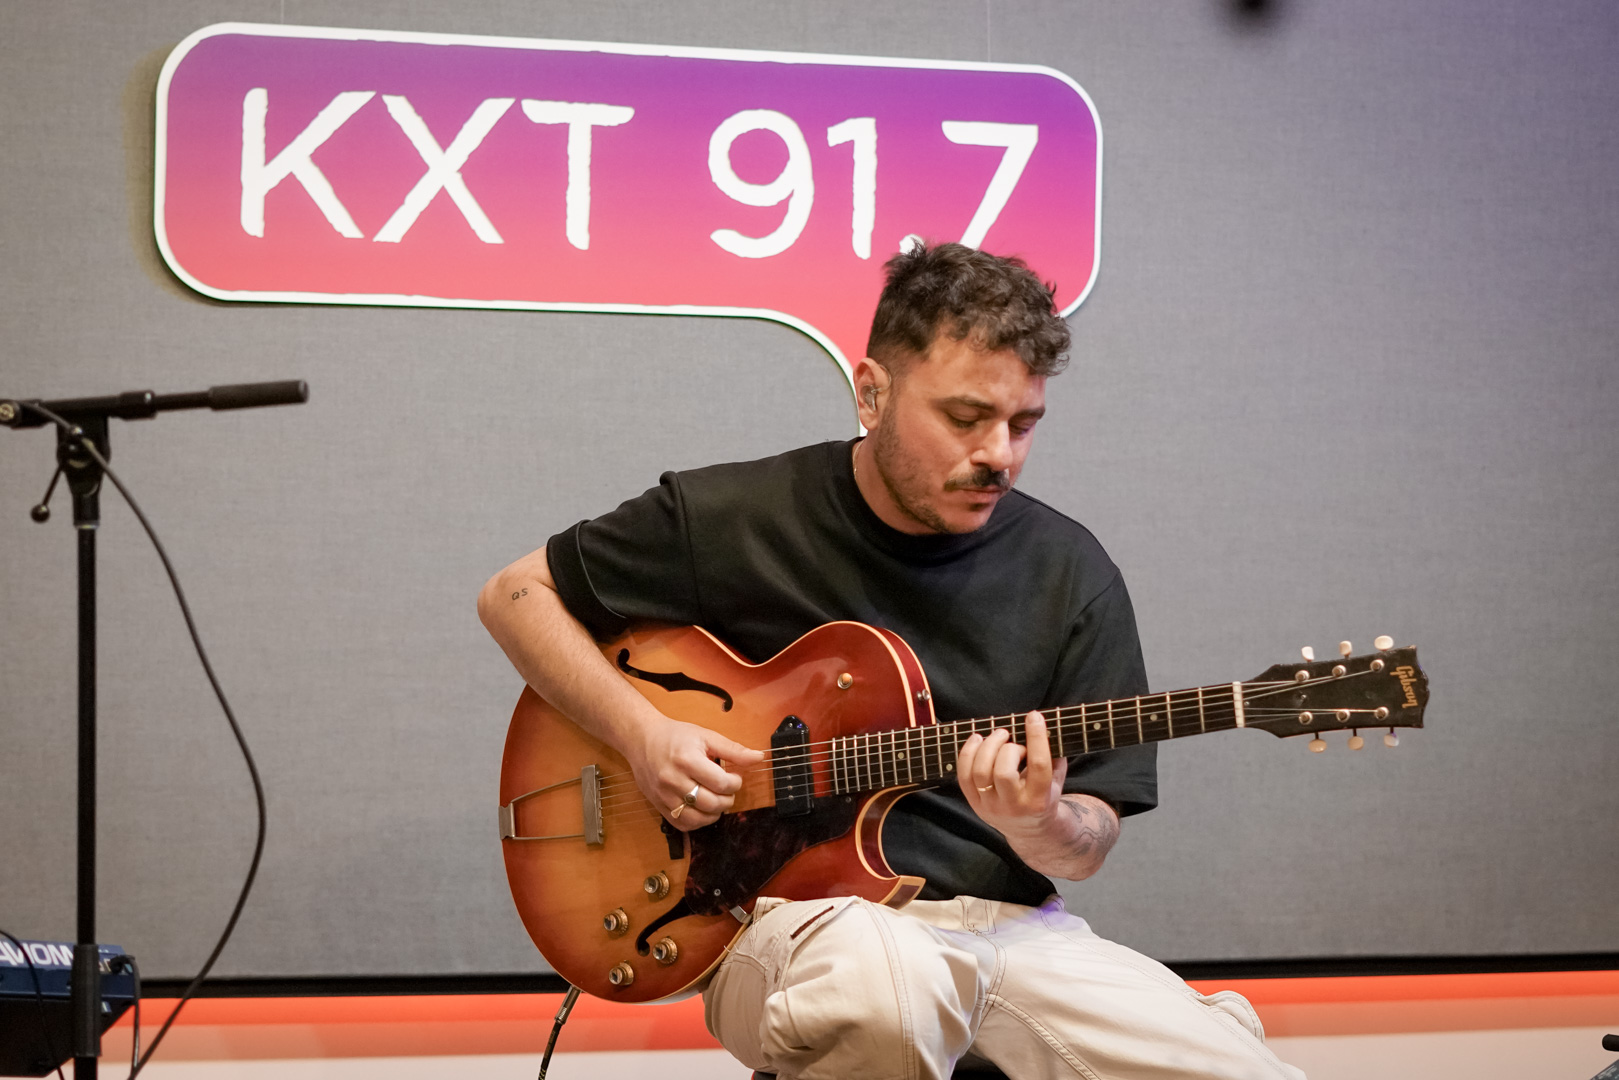 A man plays guitar in front of "KXT 91.7" sign